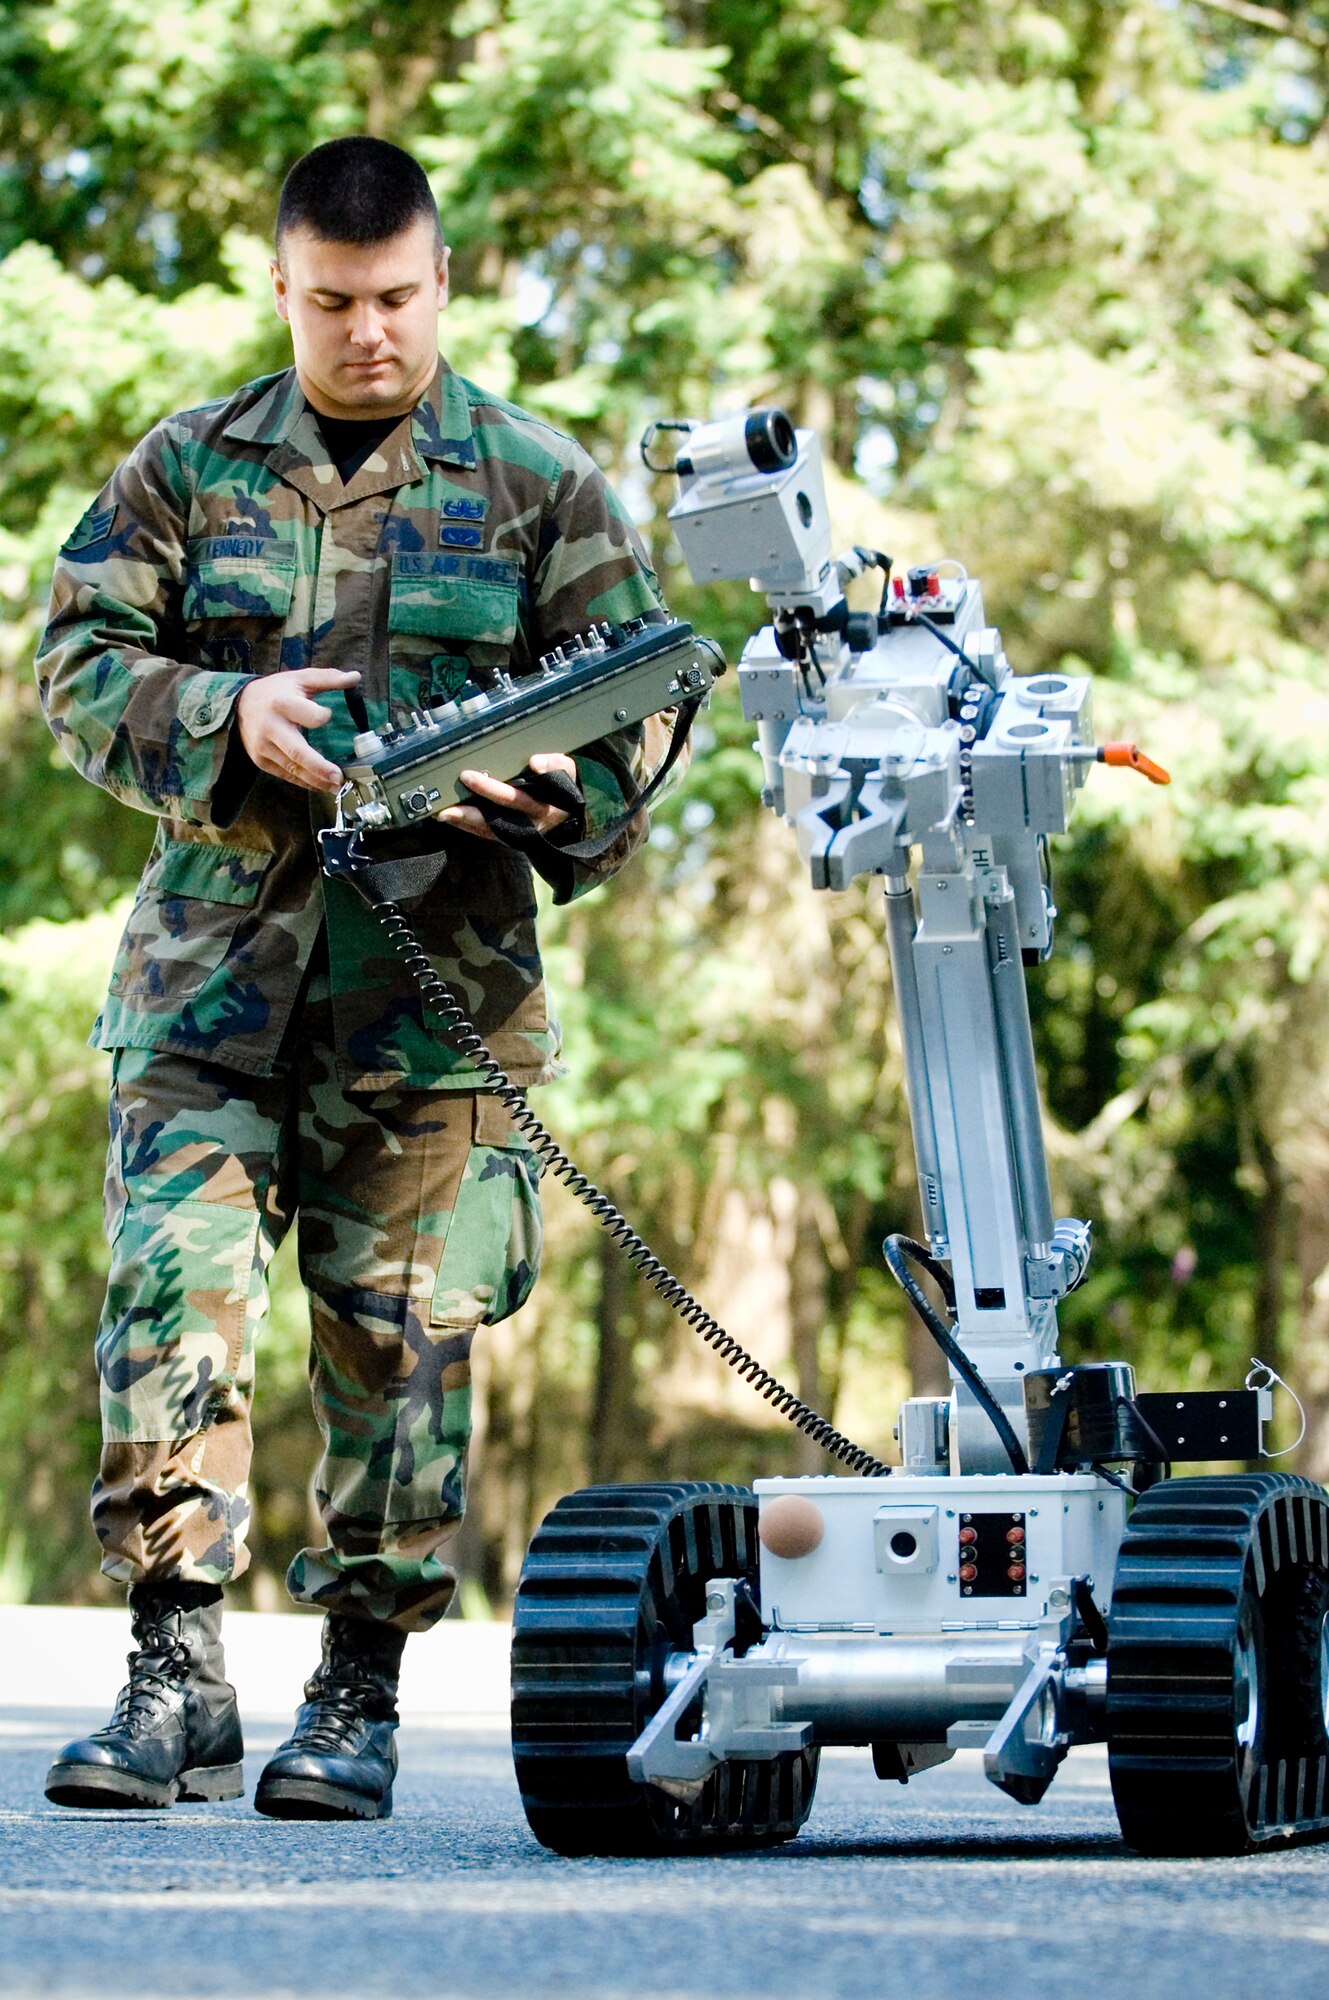 Senior Airman Jace Kennedy, an Air Force Reserve explosives ordnance disposal specialist, runs a EOD robot through its paces.  Airman Kennedy is one of more than, 2,400 Citizen Airmen in the 446th Airlift Wing, McChord Air Force Base, Wash., serving our nation. (U.S. Air Force photo/Abner Guzman)